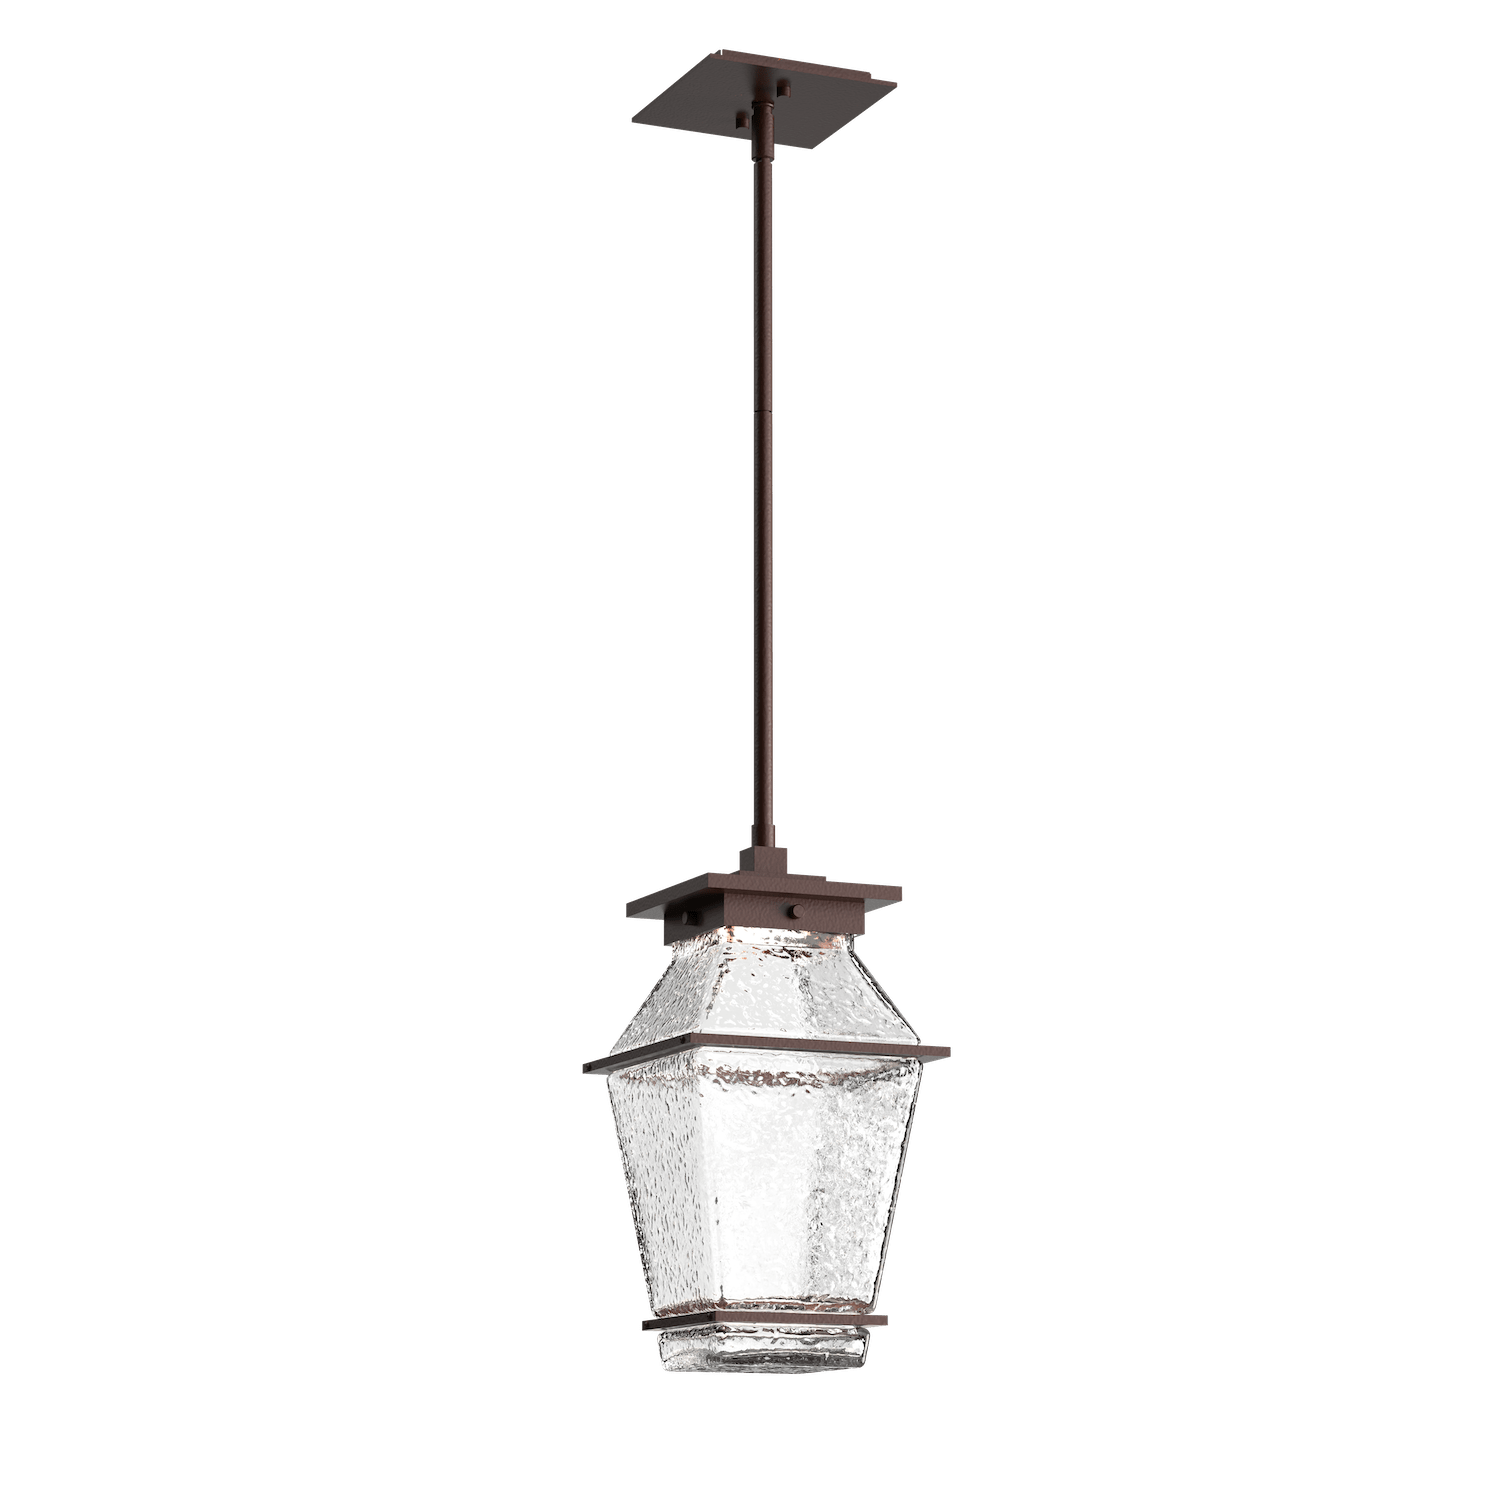 OPB0077-01-SB-C-Hammerton-Studio-Landmark-16-inch-outdoor-pendant-light-with-statuary-bronze-finish-and-clear-blown-glass-shades-and-LED-lamping